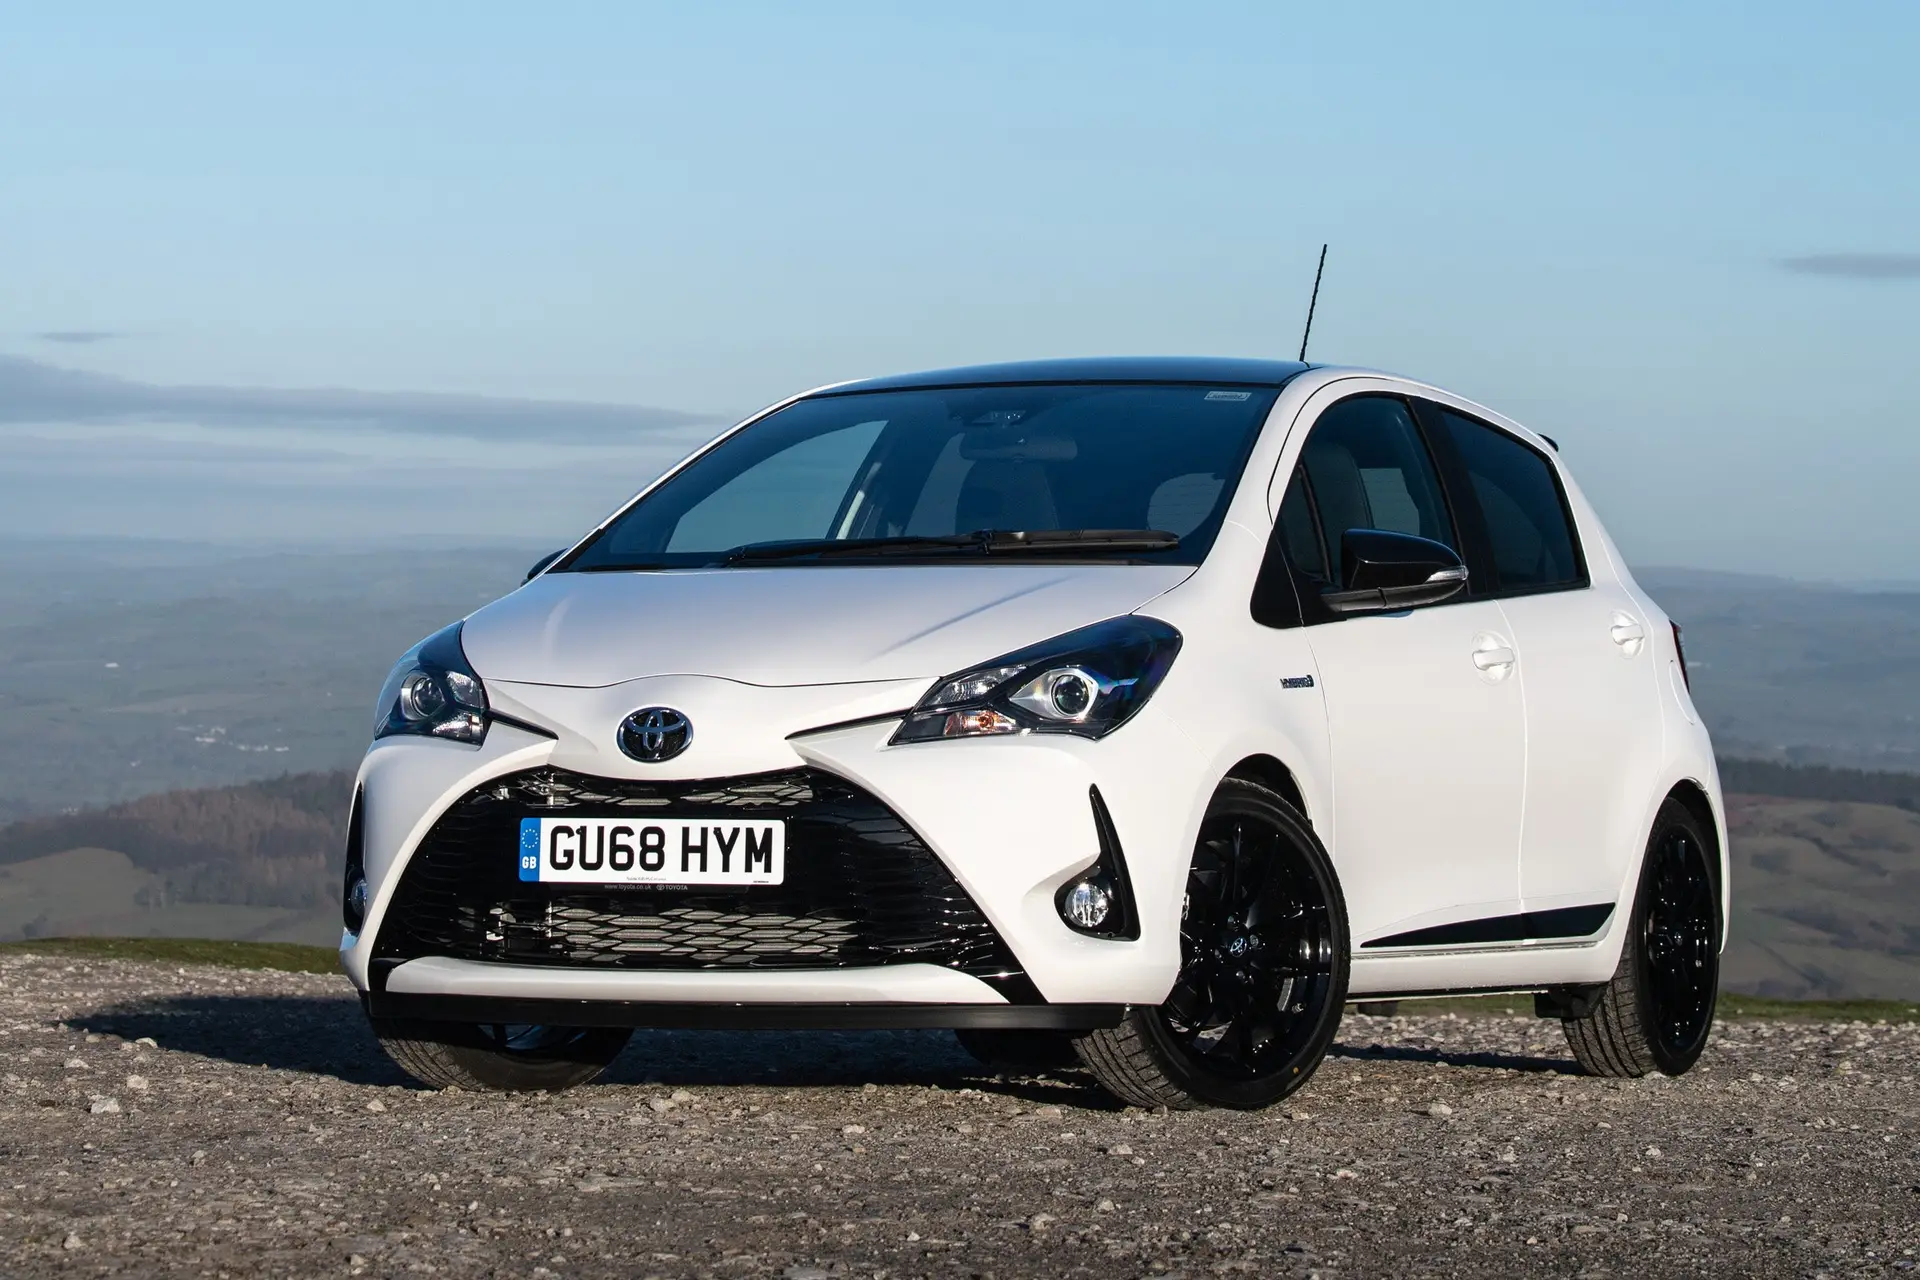 2020 Toyota Yaris: 6 Things We Like (and 4 Not So Much)